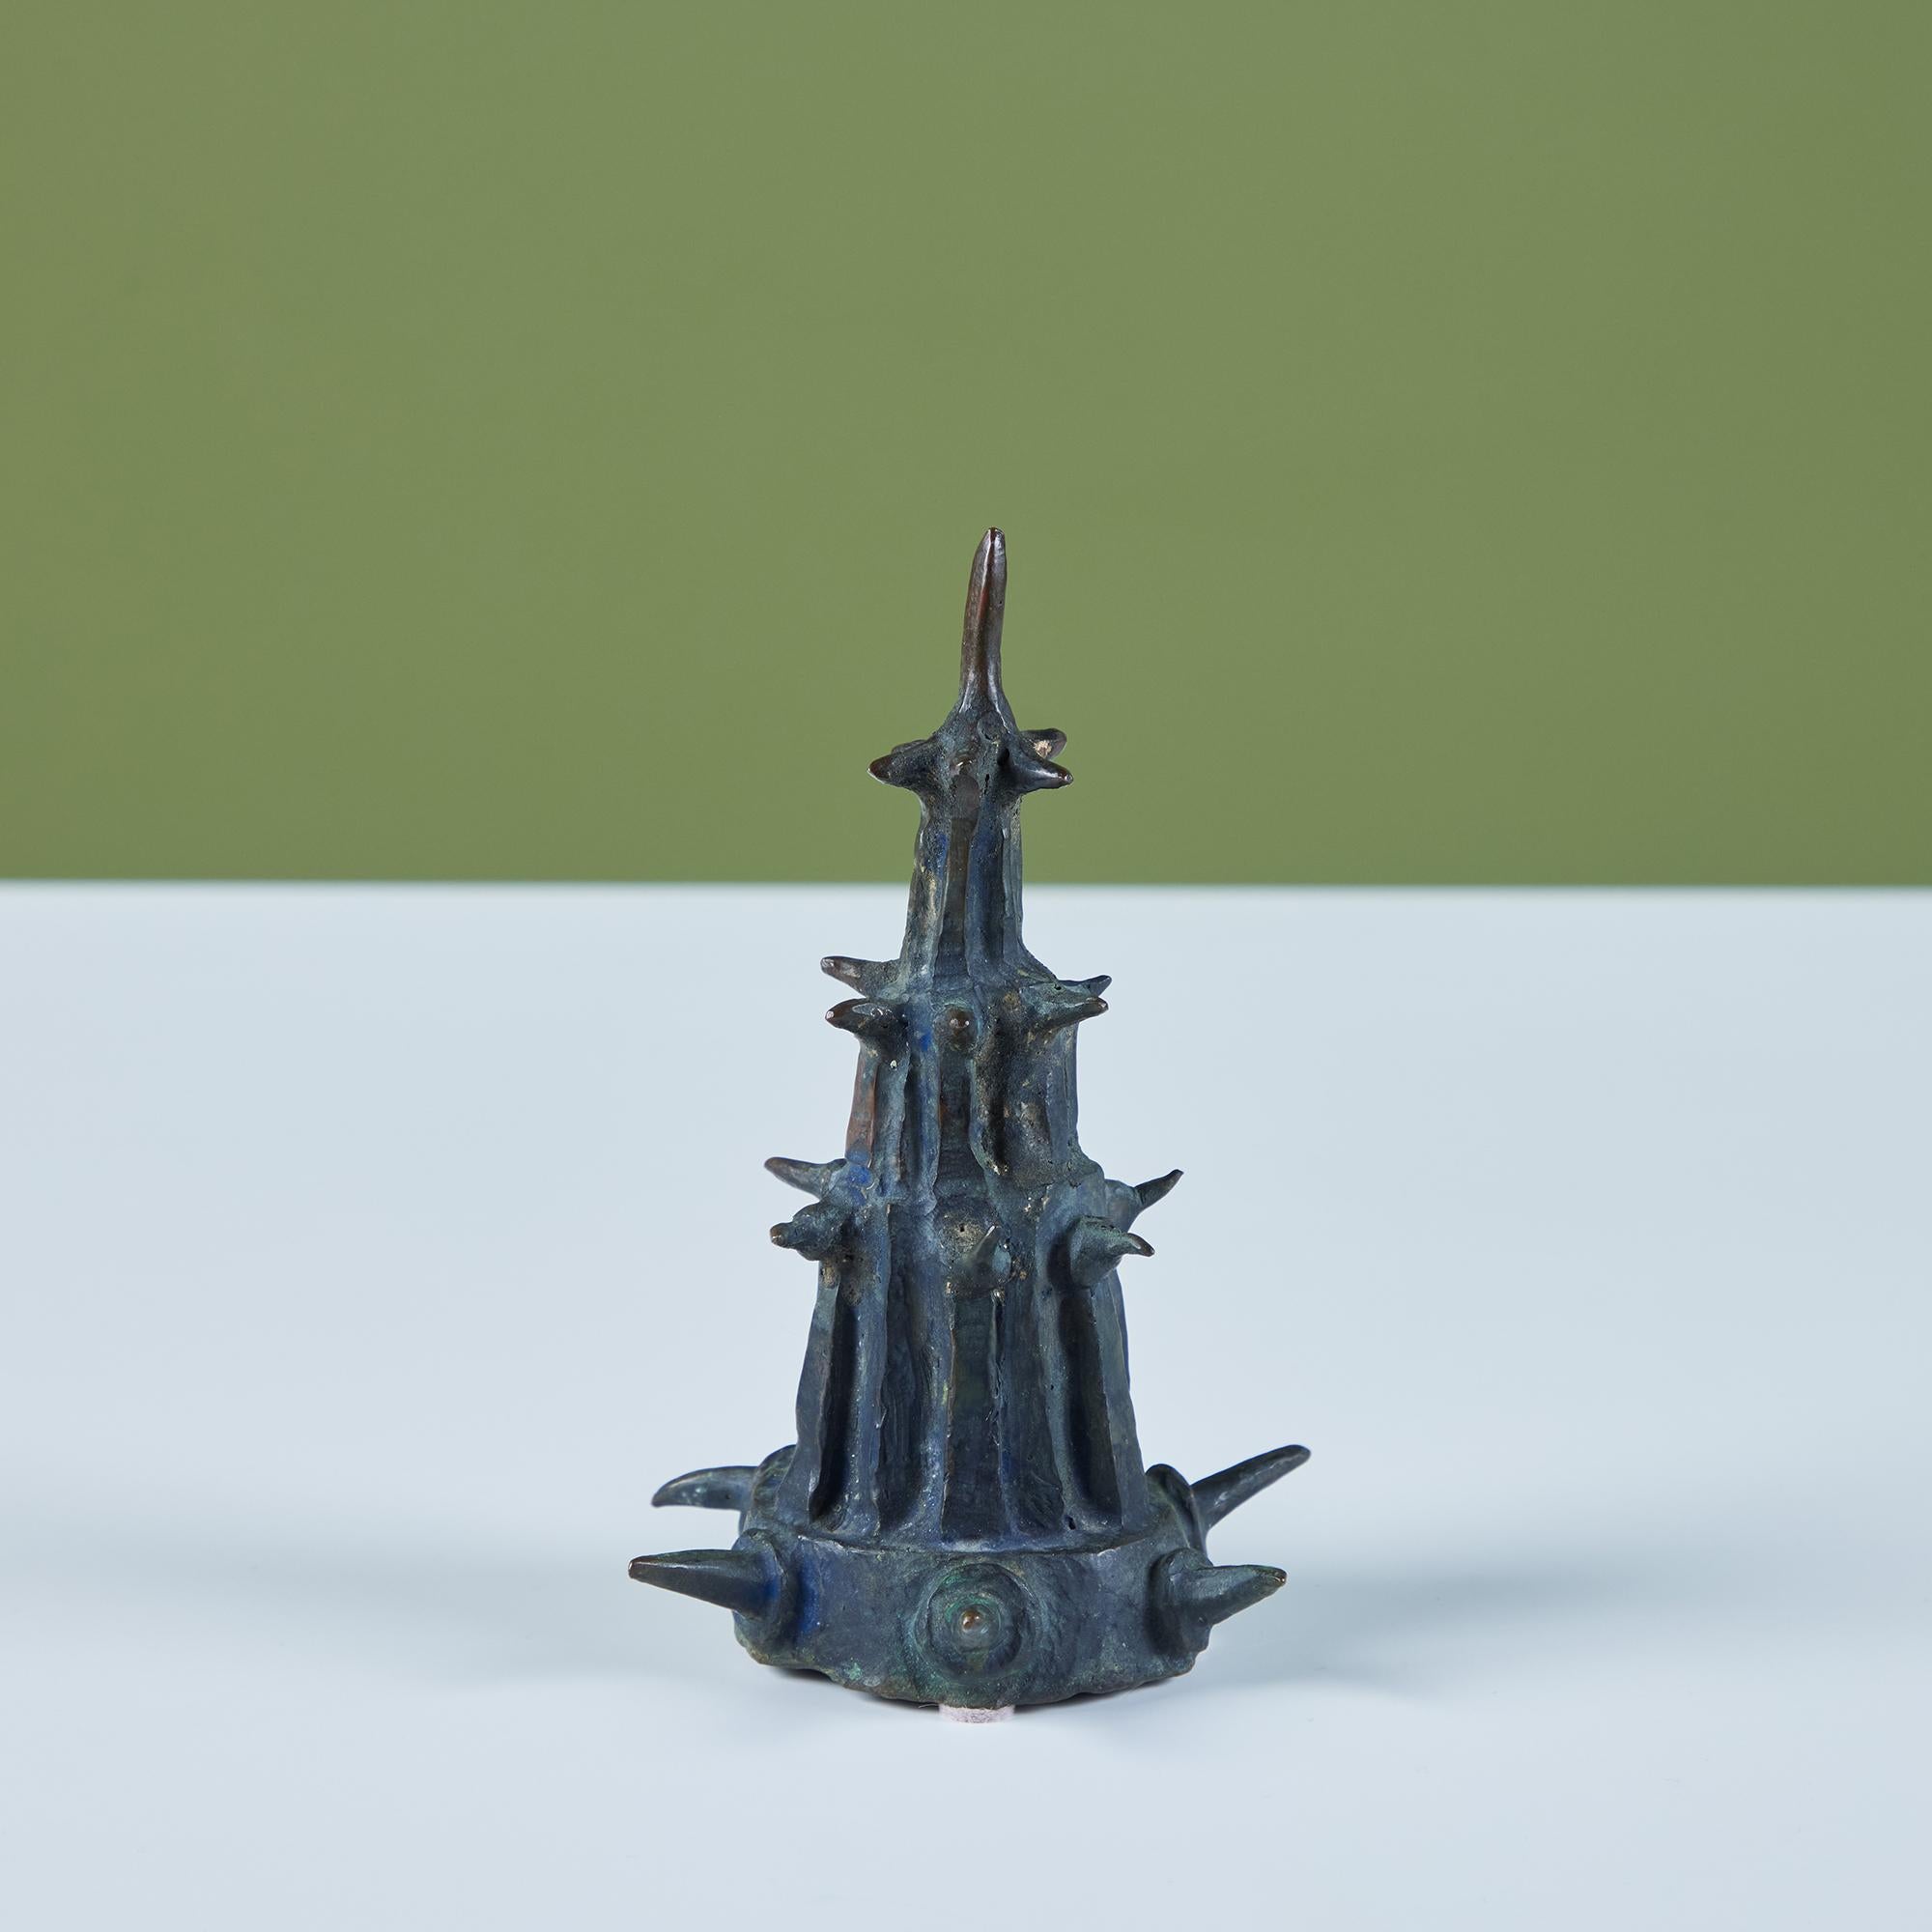 Cast bronze sculpture by American sculptor J. Dale M'Hall featuring a cone tower with protruding spikes all over. James began sculpting in the 1960's and has worked with a variety of different media throughout his career but bronze sculpting is his